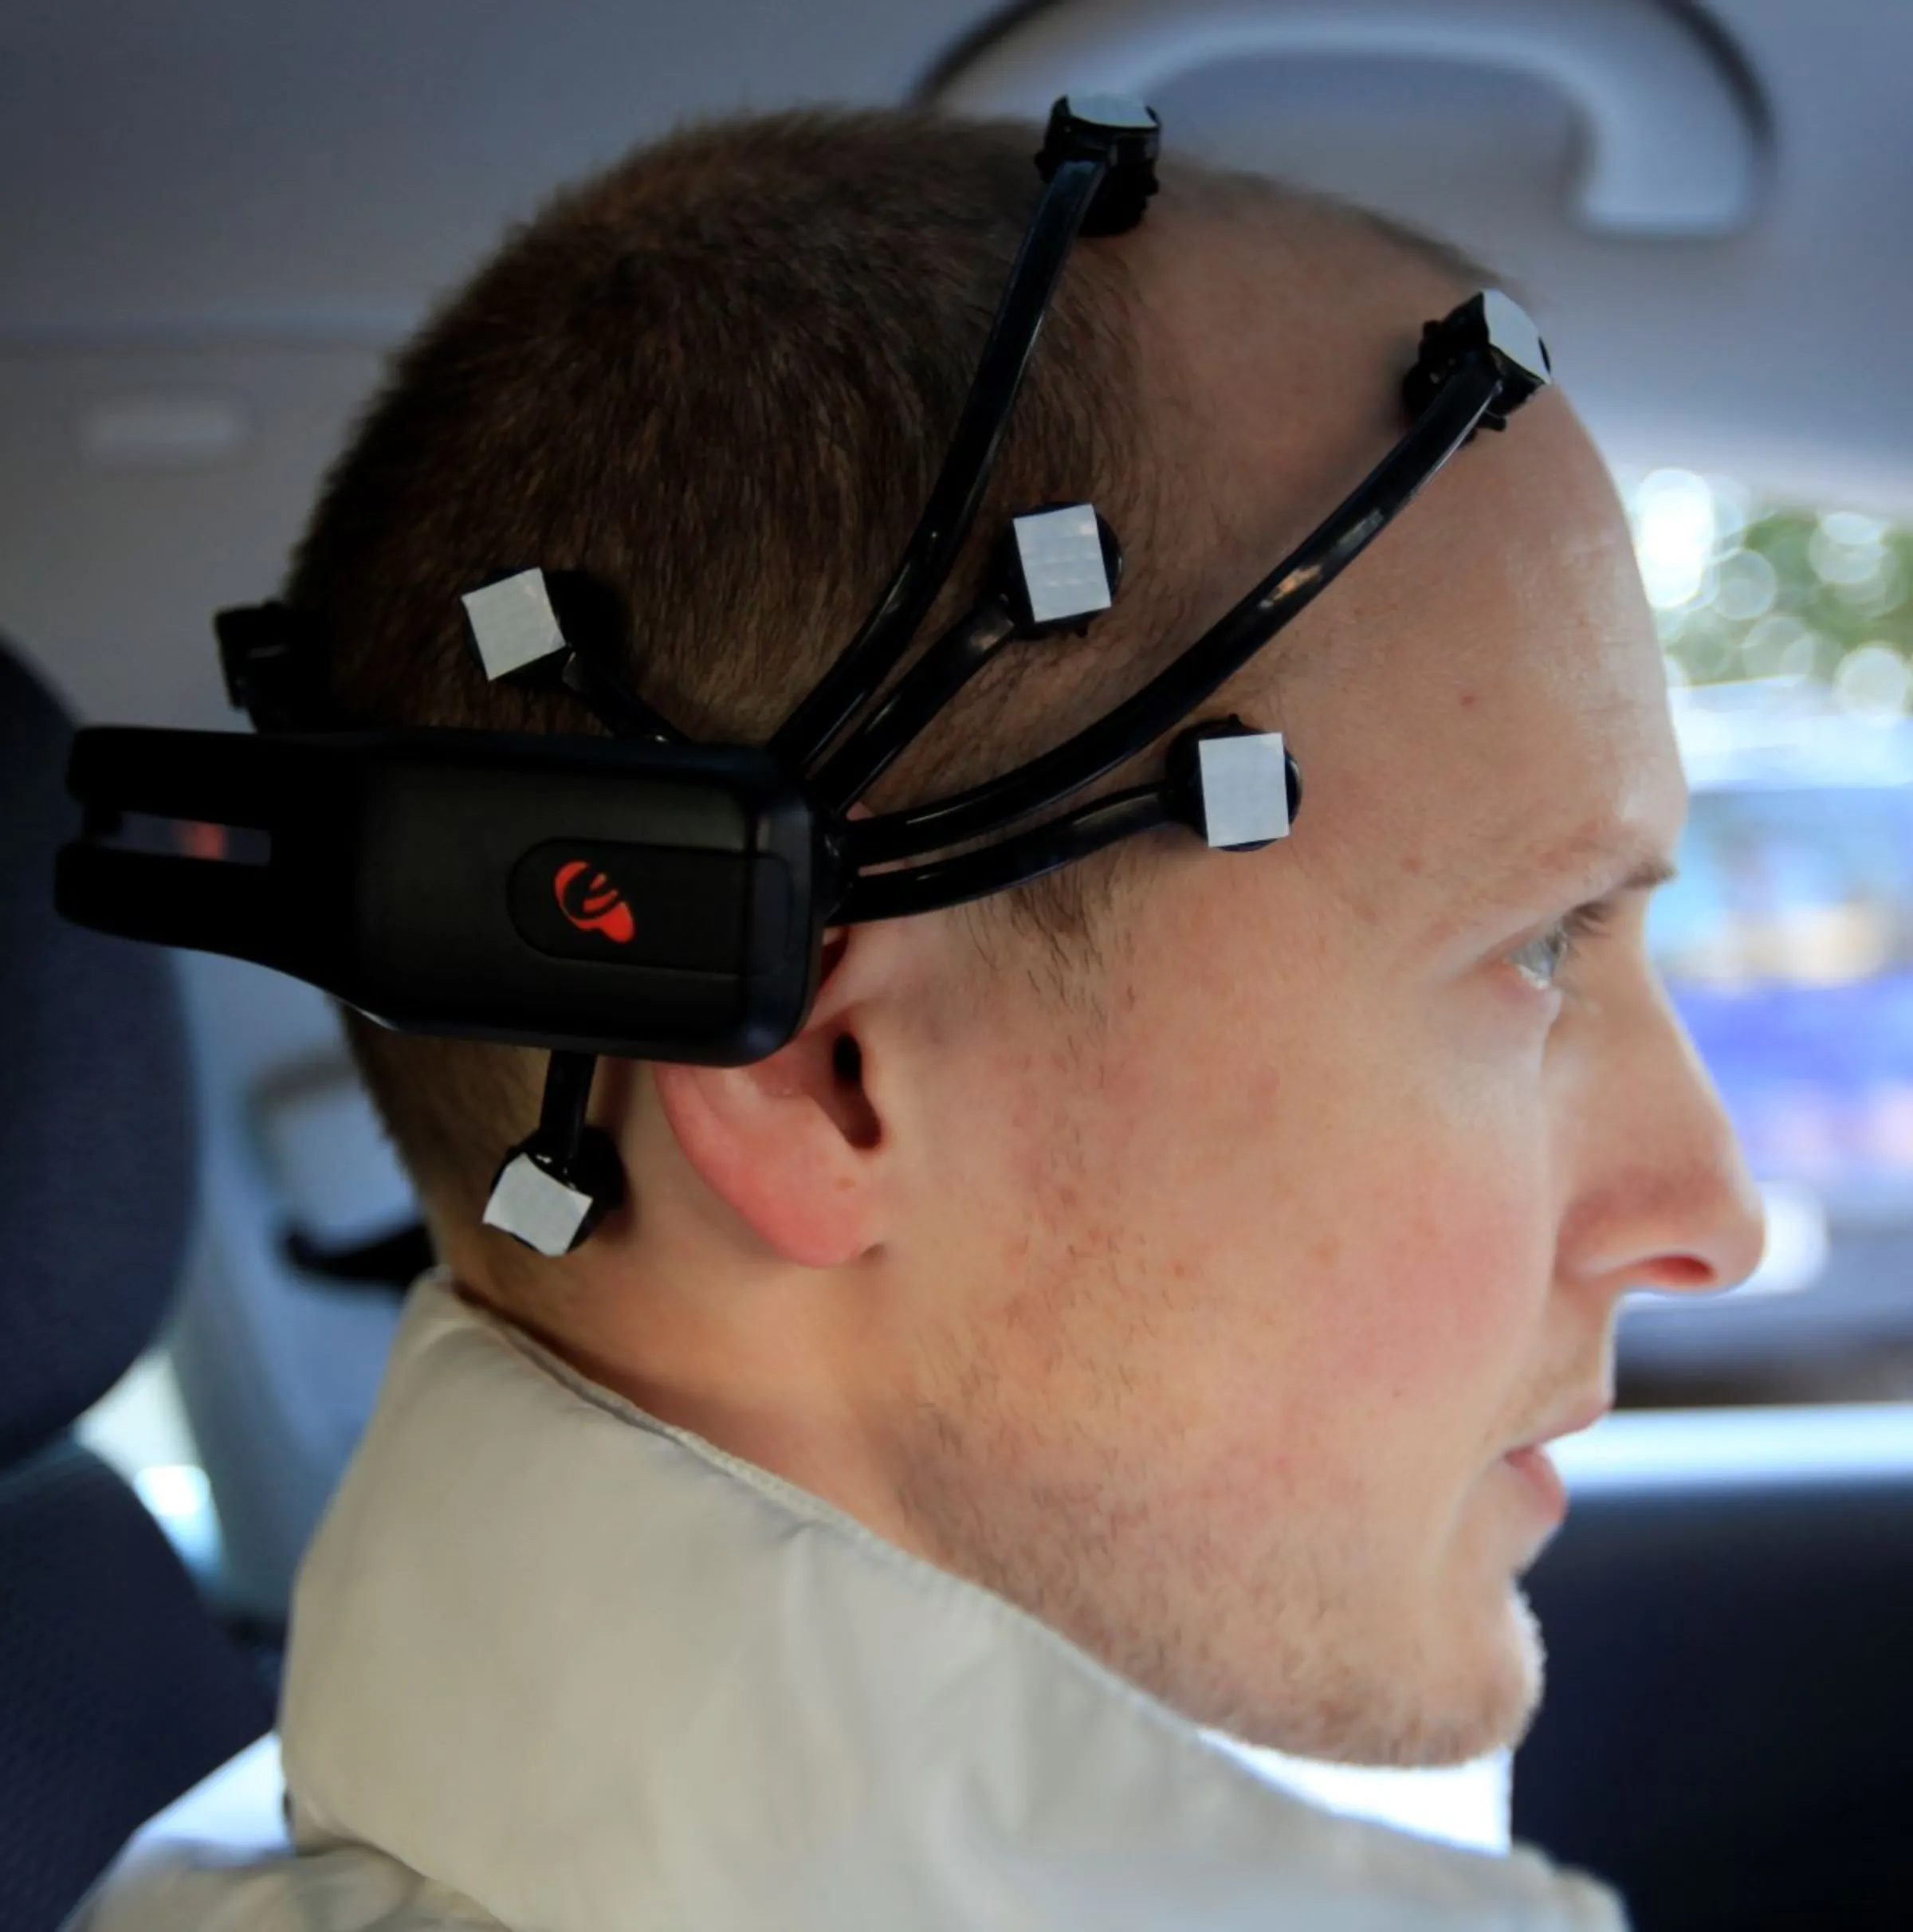 A member of the AutoNOMOS research team of the Artificial Intelligence Group at the Freie Universitaet (Free University) wears a Emotiv Epoc device as he demonstrates a hands-free driving of the research car named 'MadeInGermany' during a test in Berlin, February 28, 2011. REUTERS/Fabrizio Bensch